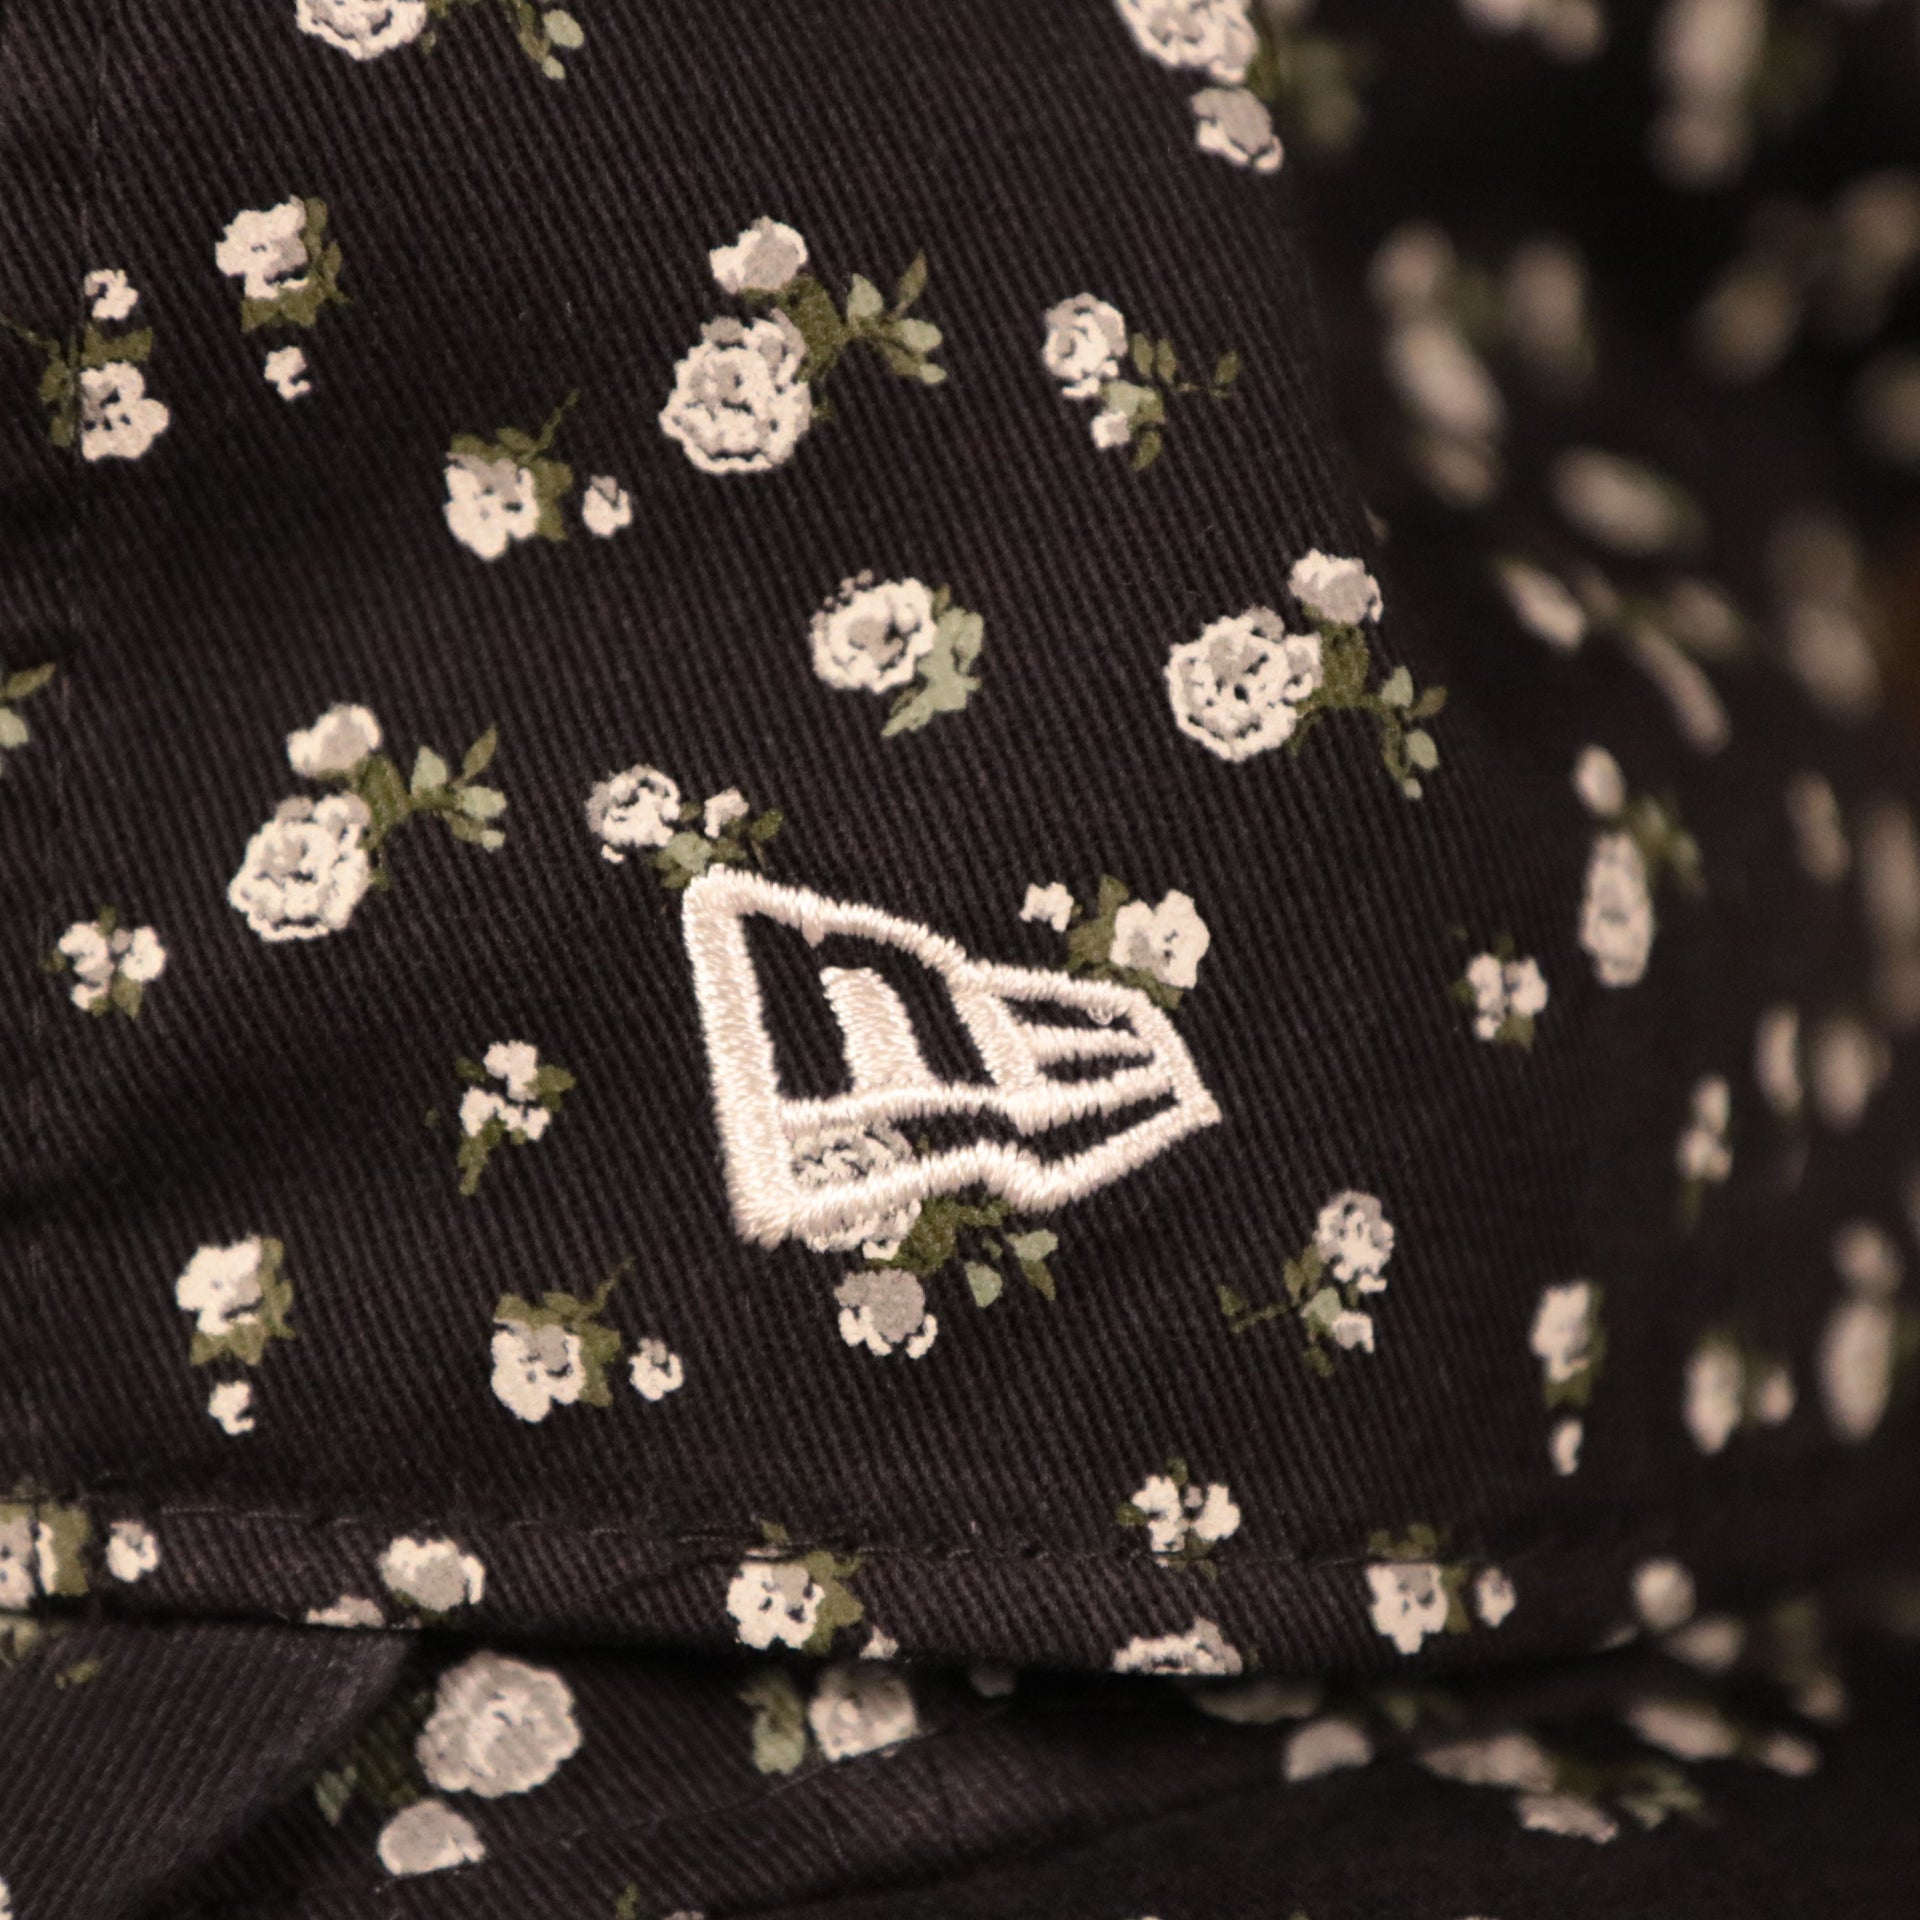 The wearer's left side of the New York Yankees women micro floral cap has the logo of New Era in white.